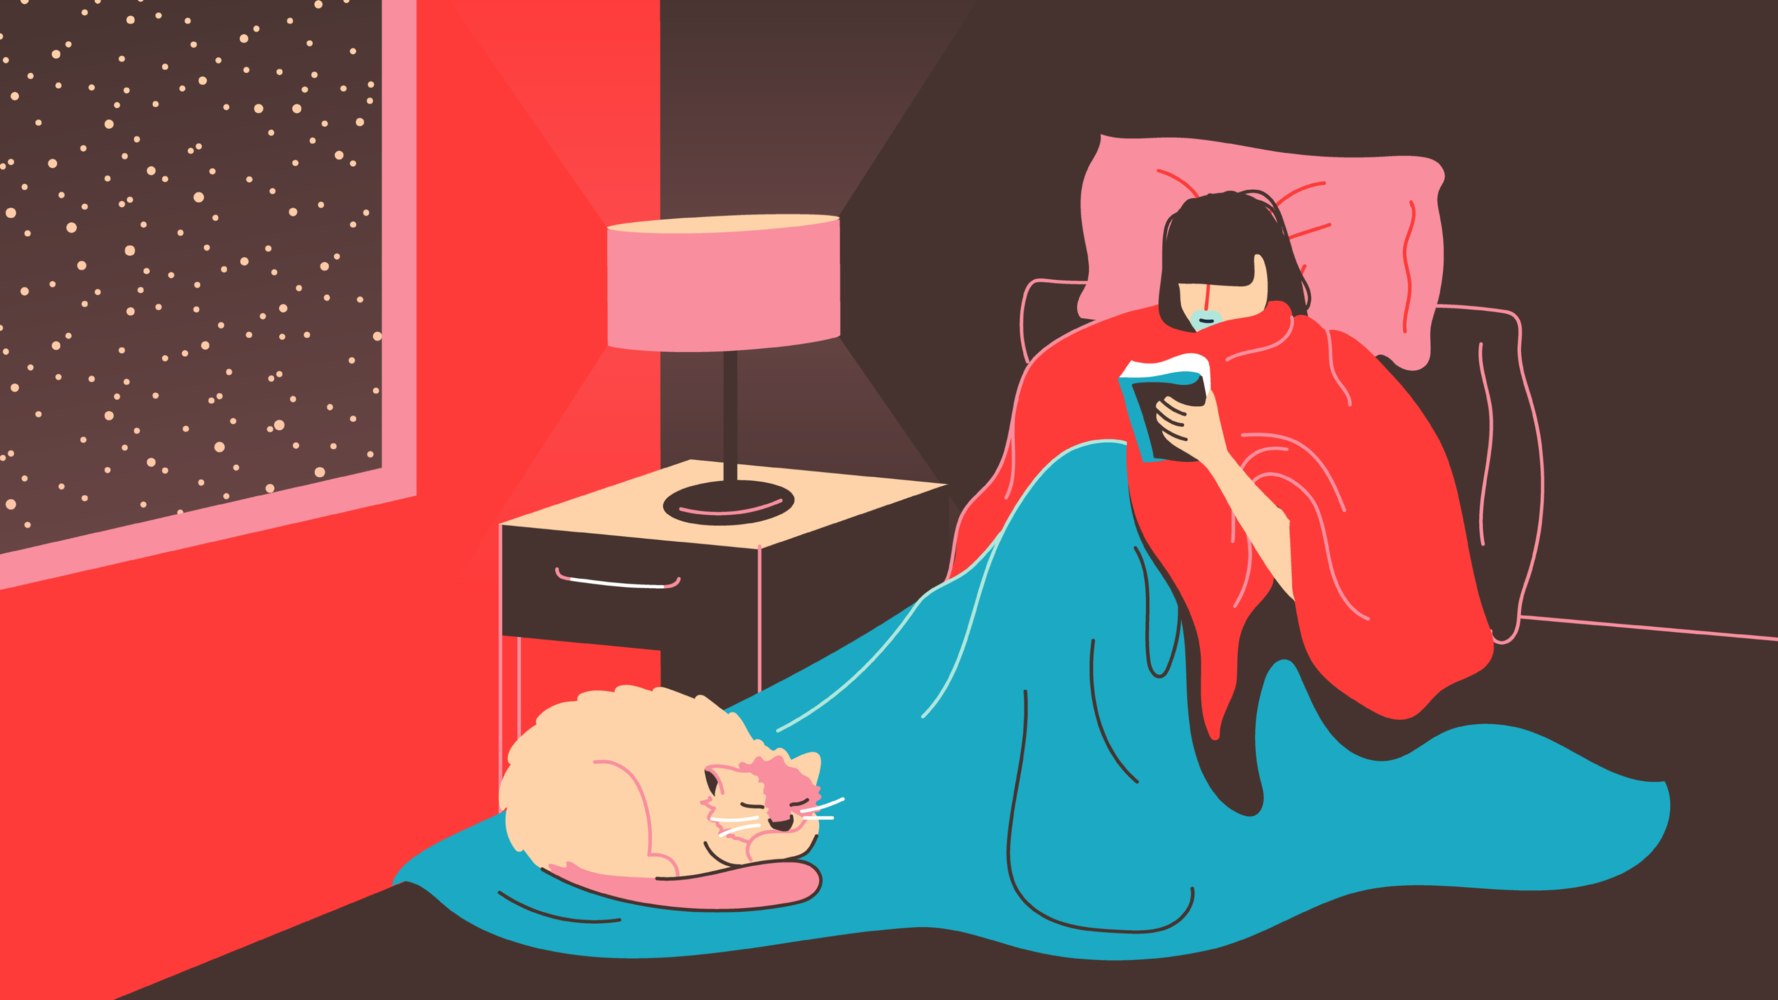 Person reading a book while wrapped in warm blankets, with a cat at their feet